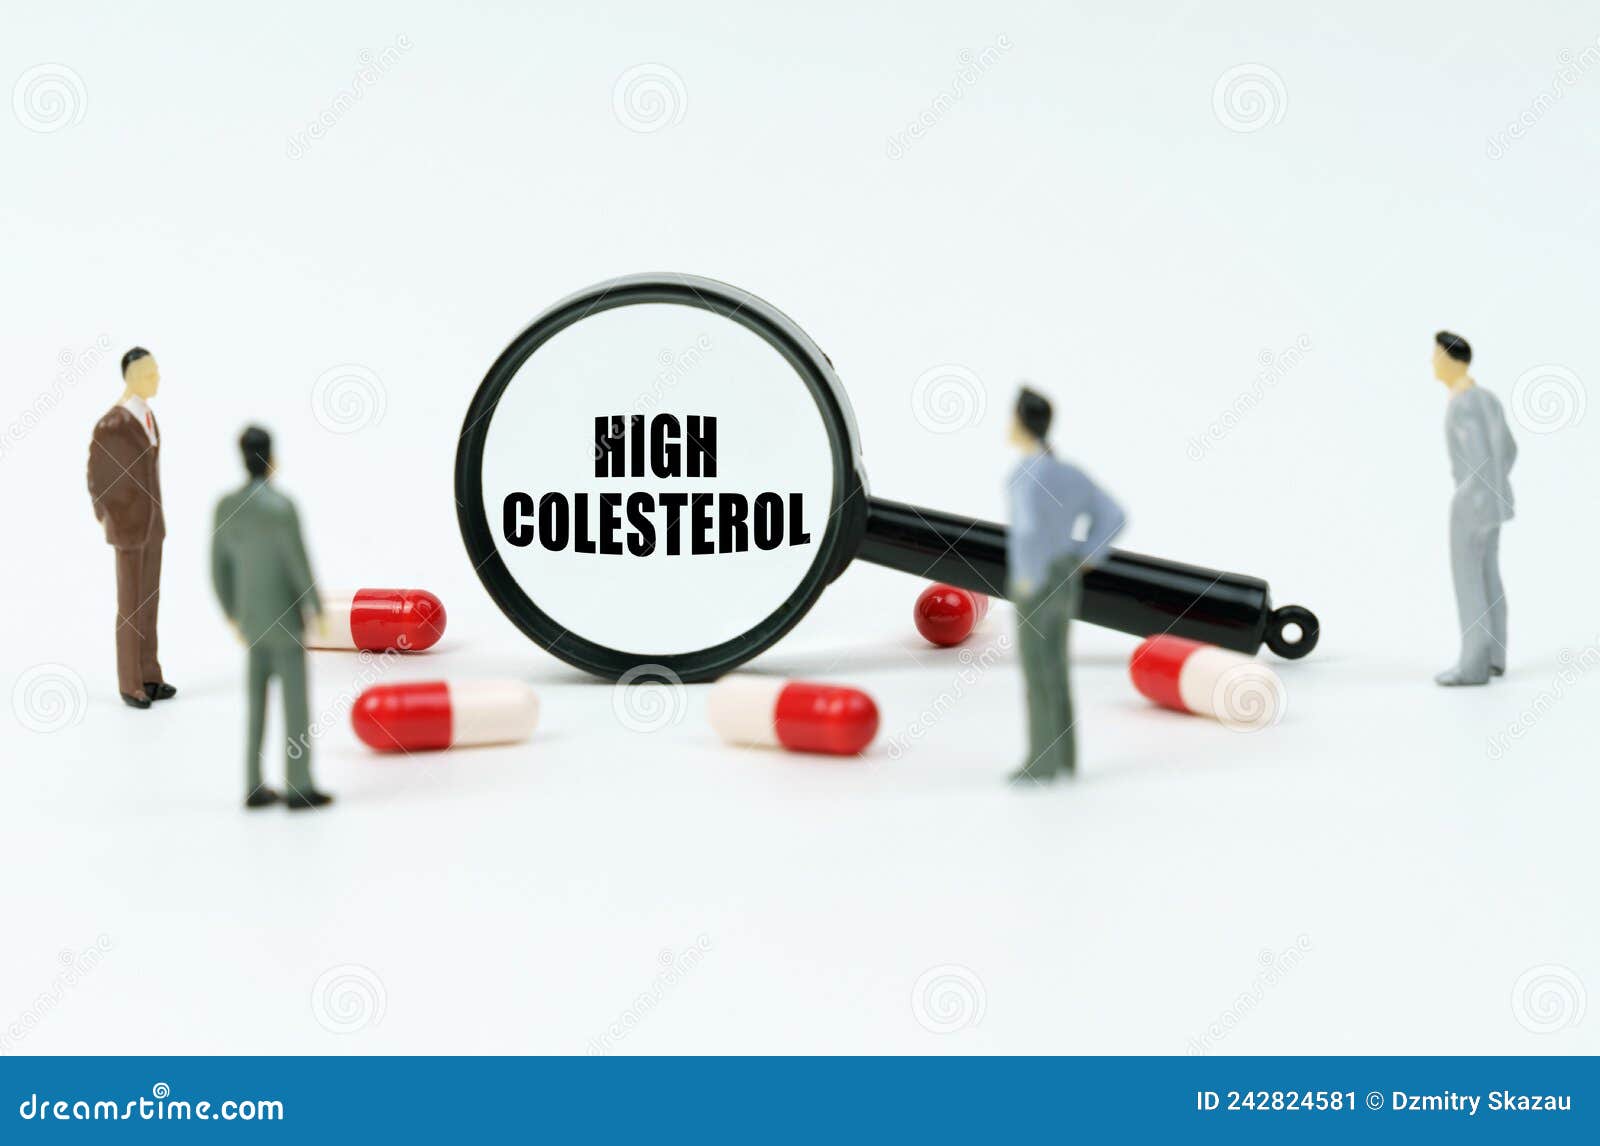 on a white surface are pills, figurines of people and a magnifying glass with the inscription - high colesterol